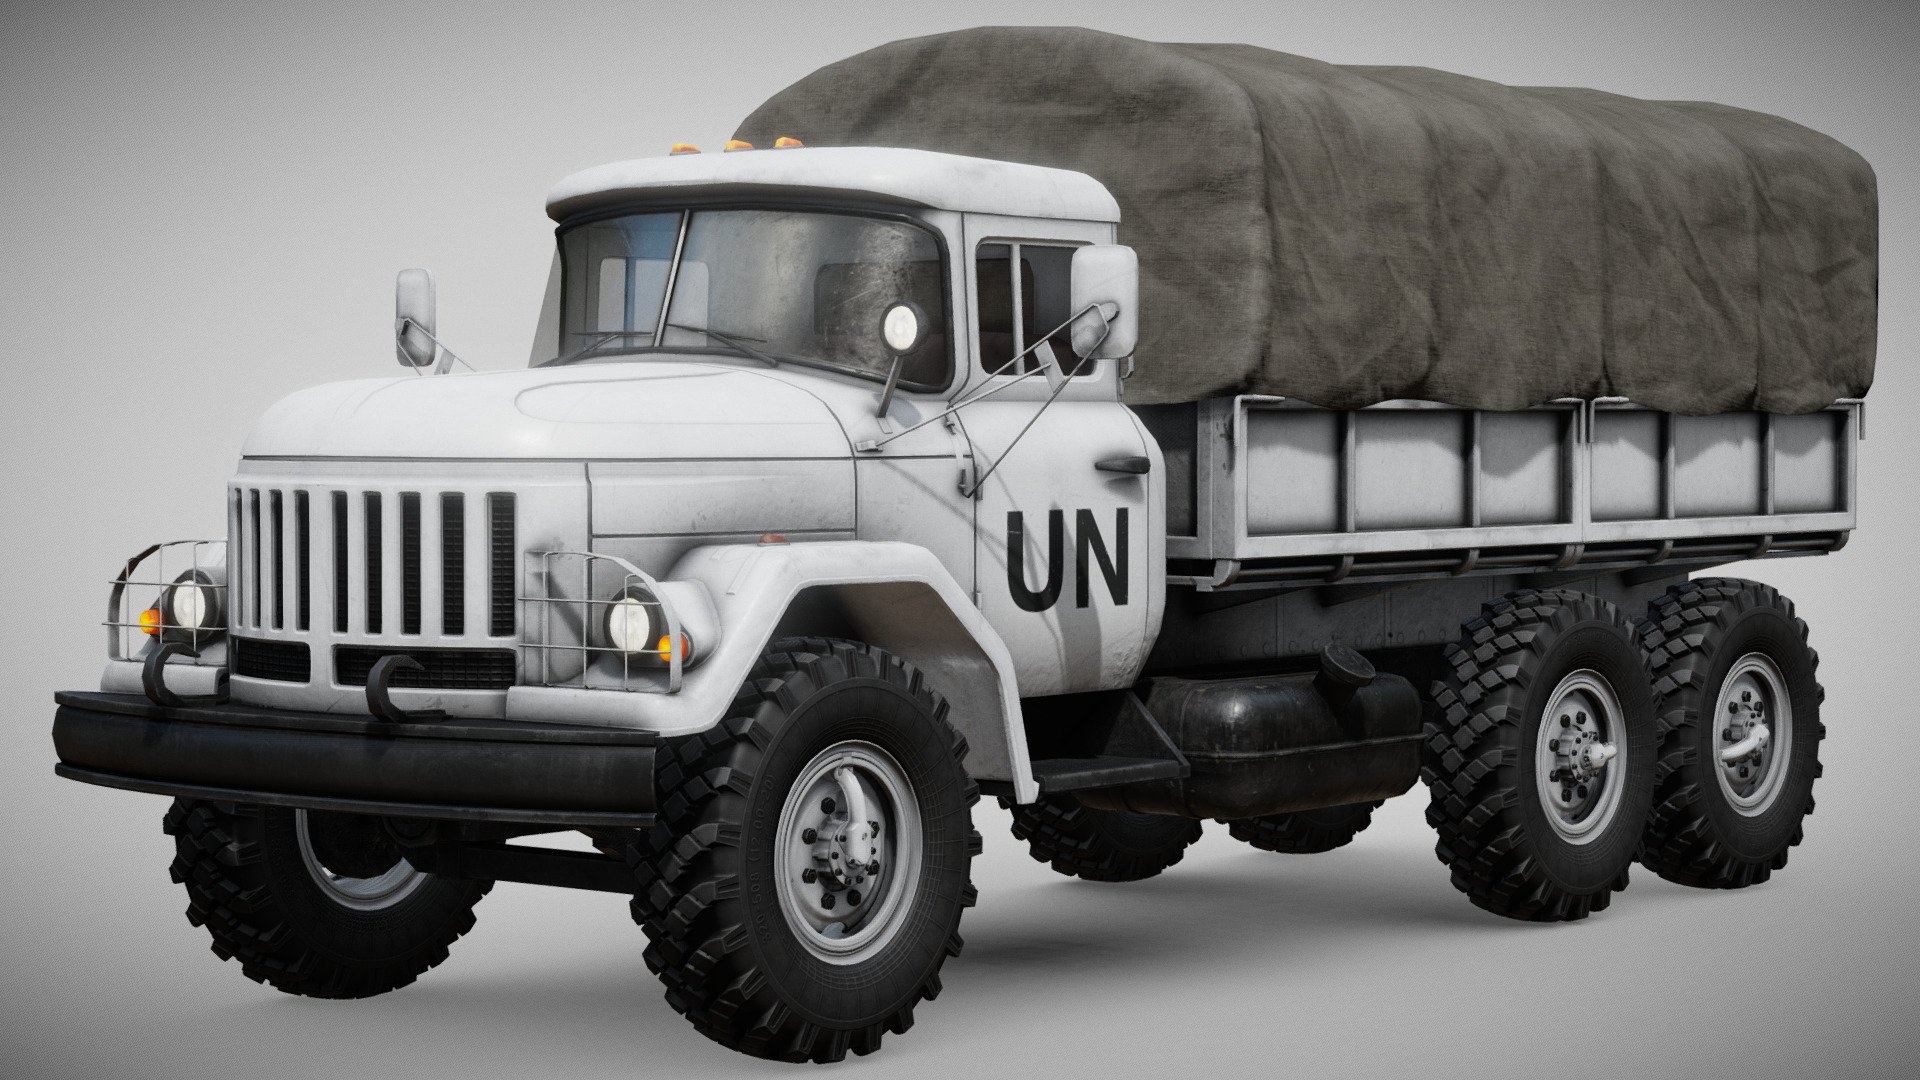 General purpose 3.5 tonne 6x6 army truck designed in the Soviet Union. Here in version with white paintjob and UN markings.

Separate materials for: cabin, interior, glass, frame, cargo bed, cargo bed fabric cover and crates.

Wheels, cargo bed tarp and cargo crates as separate objects.

4k PBR textures for cabin, interior, frame and cargo bed and cargo bed cover. 2k for crates and wheels. 1k for the glass.

Textures for glass with alpha transparency 3d model